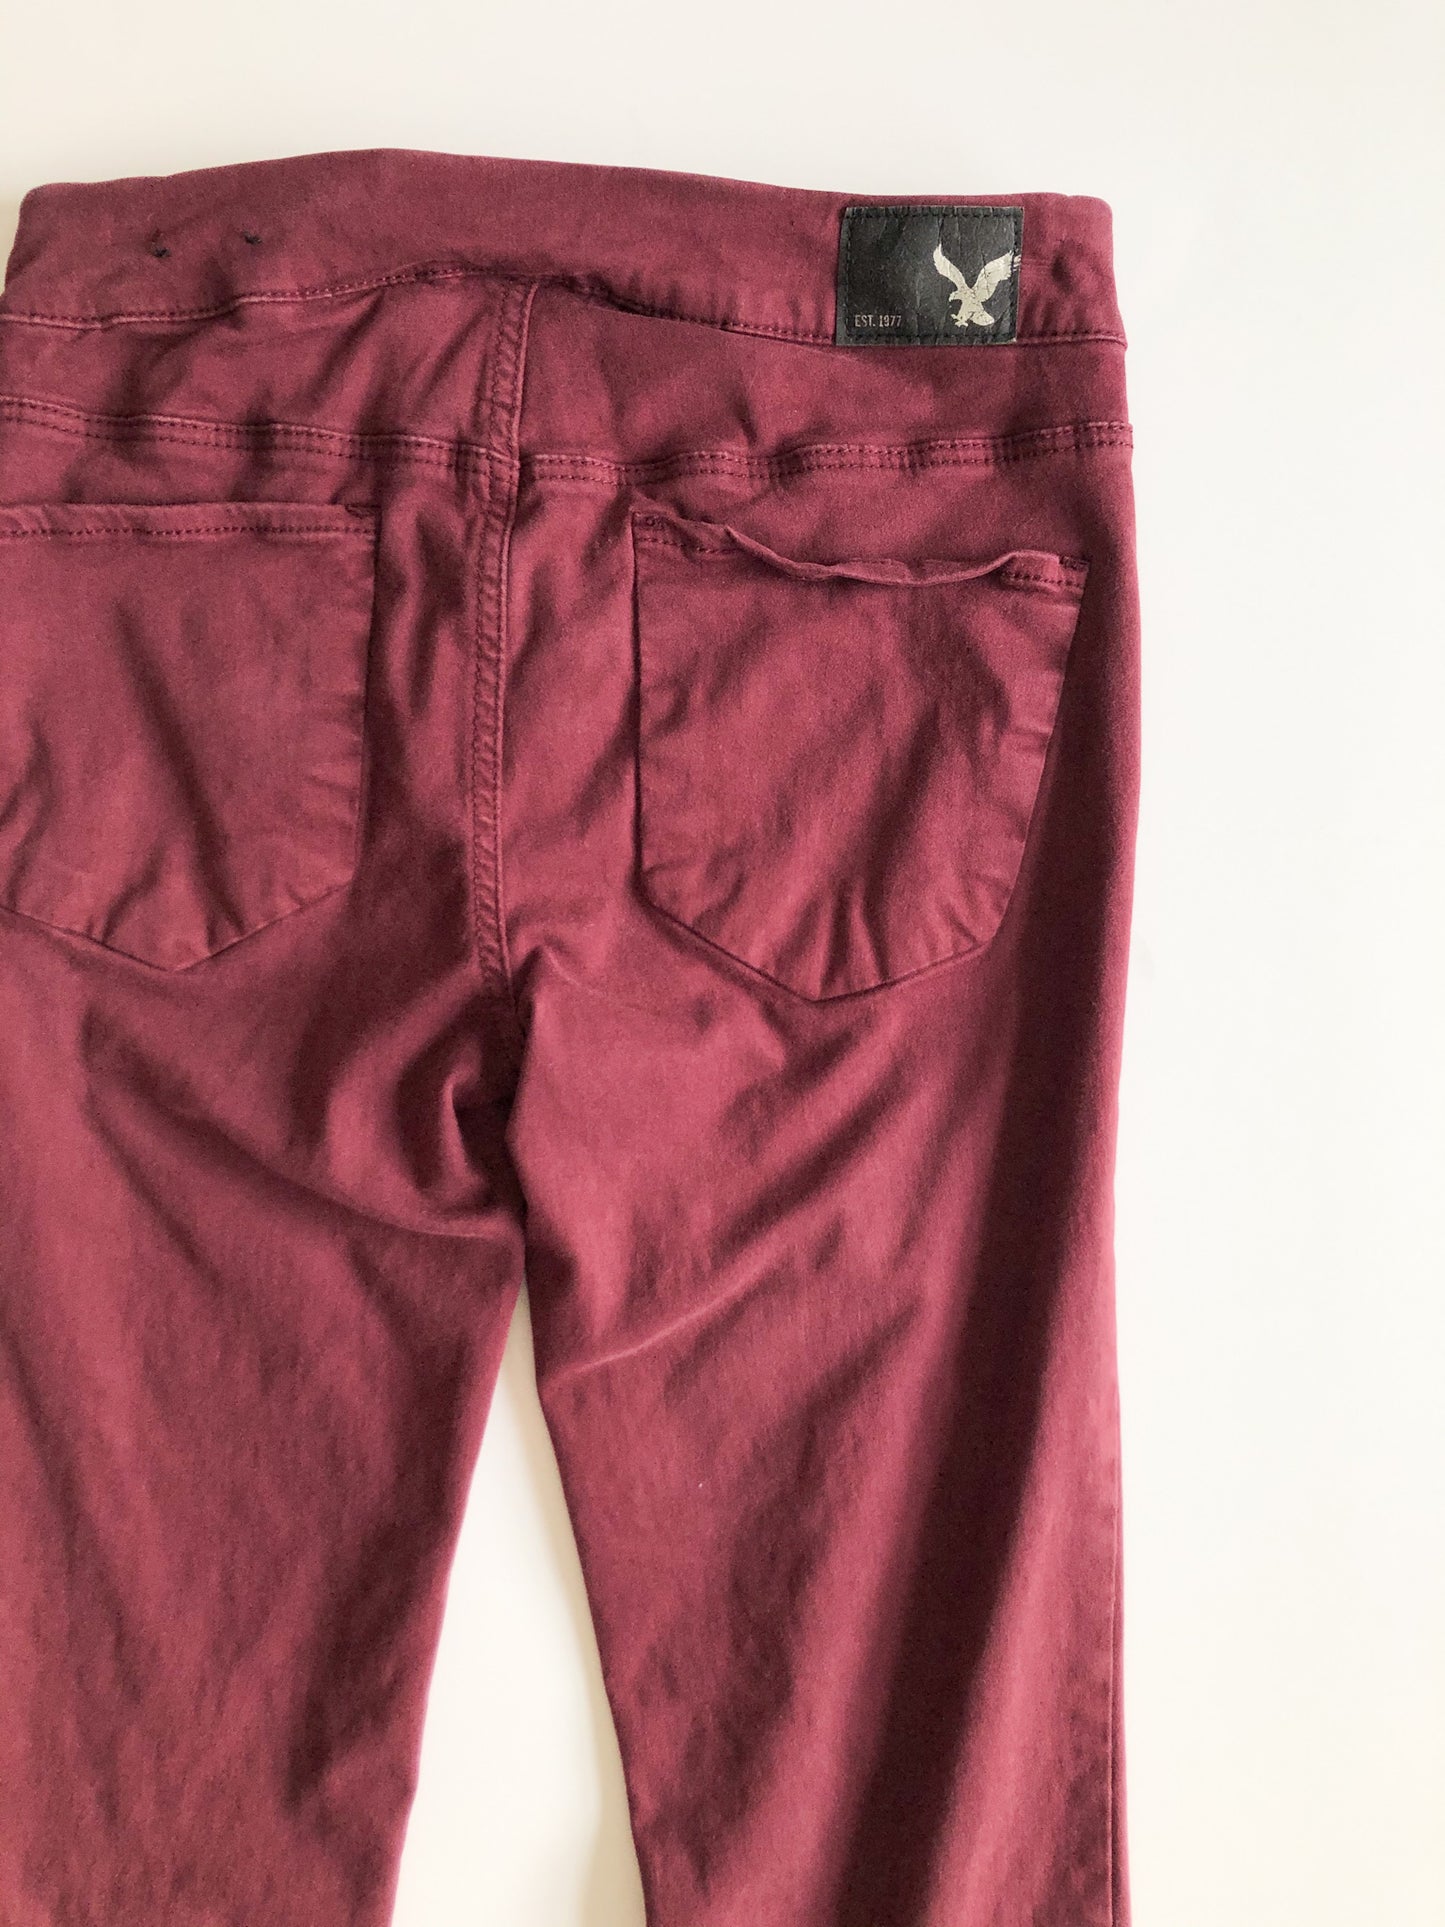 American Eagle Extreme Legging Highest Rise Wine Deep Red Jeggings - Size 0